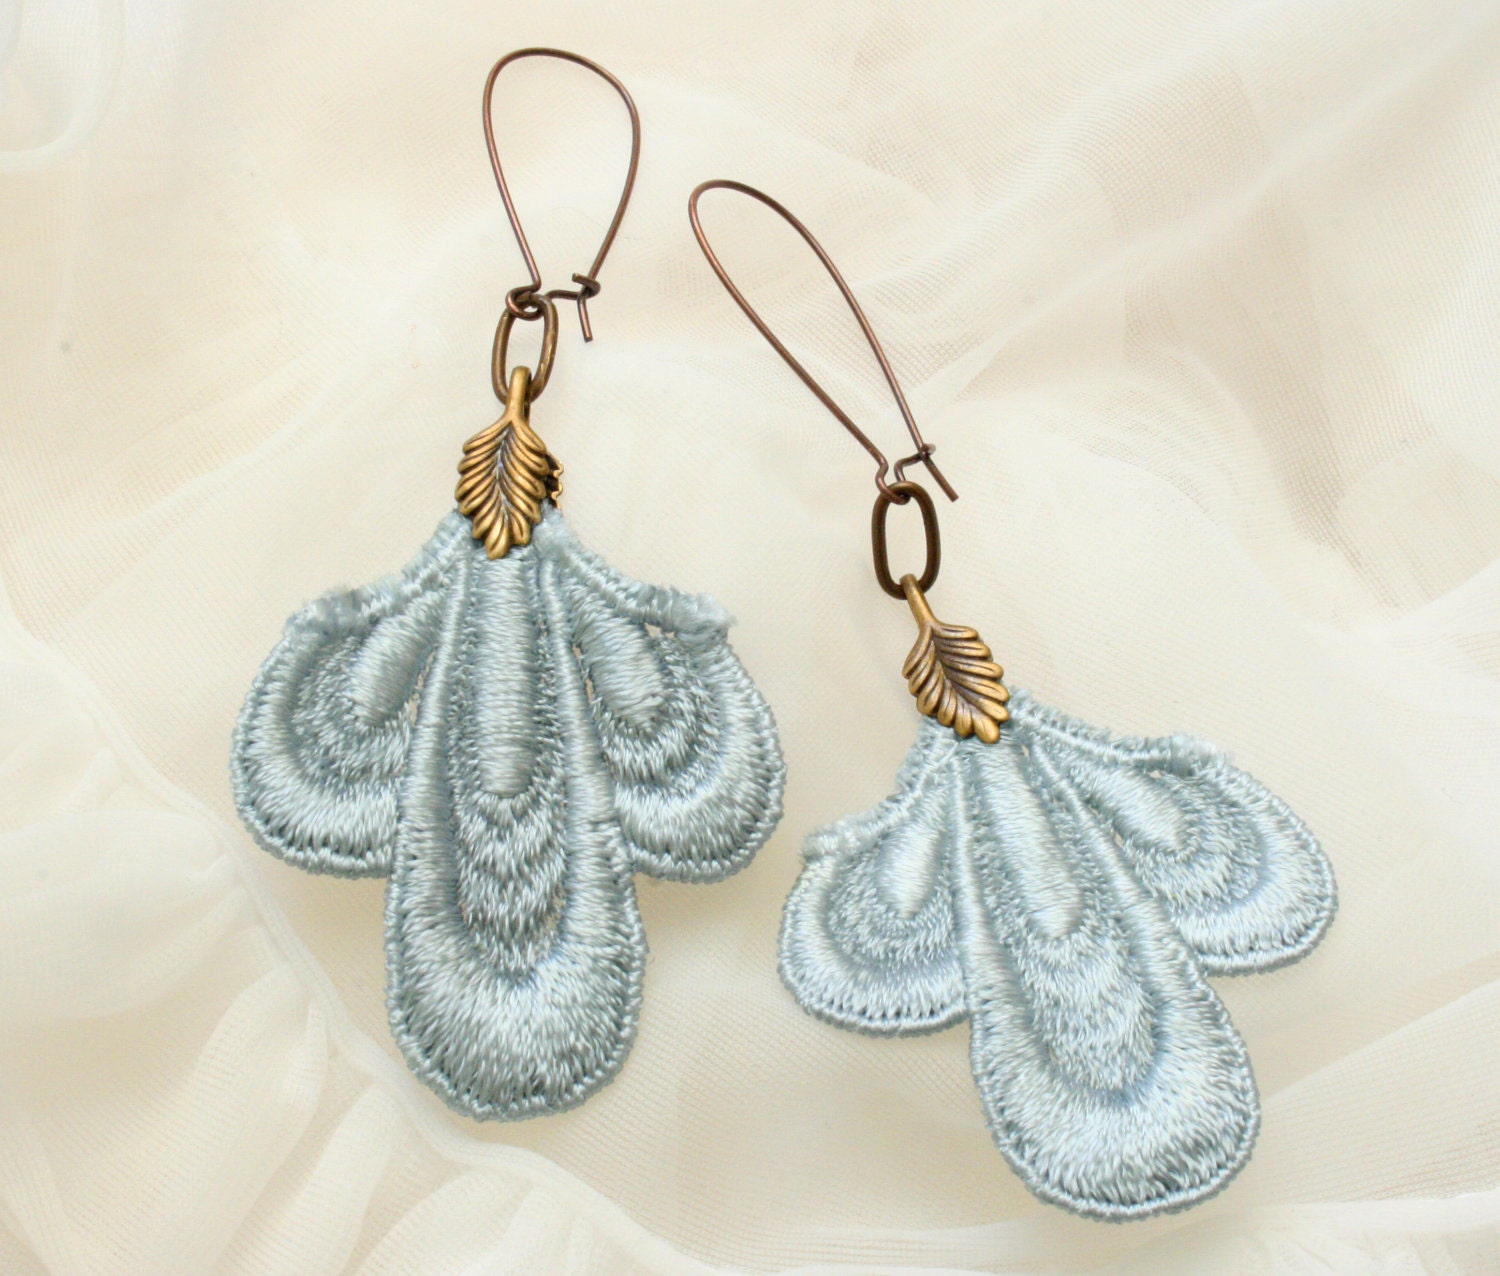 Trois Petales Venise Lace Earrings in Ice Blue by TinaEvaRenee